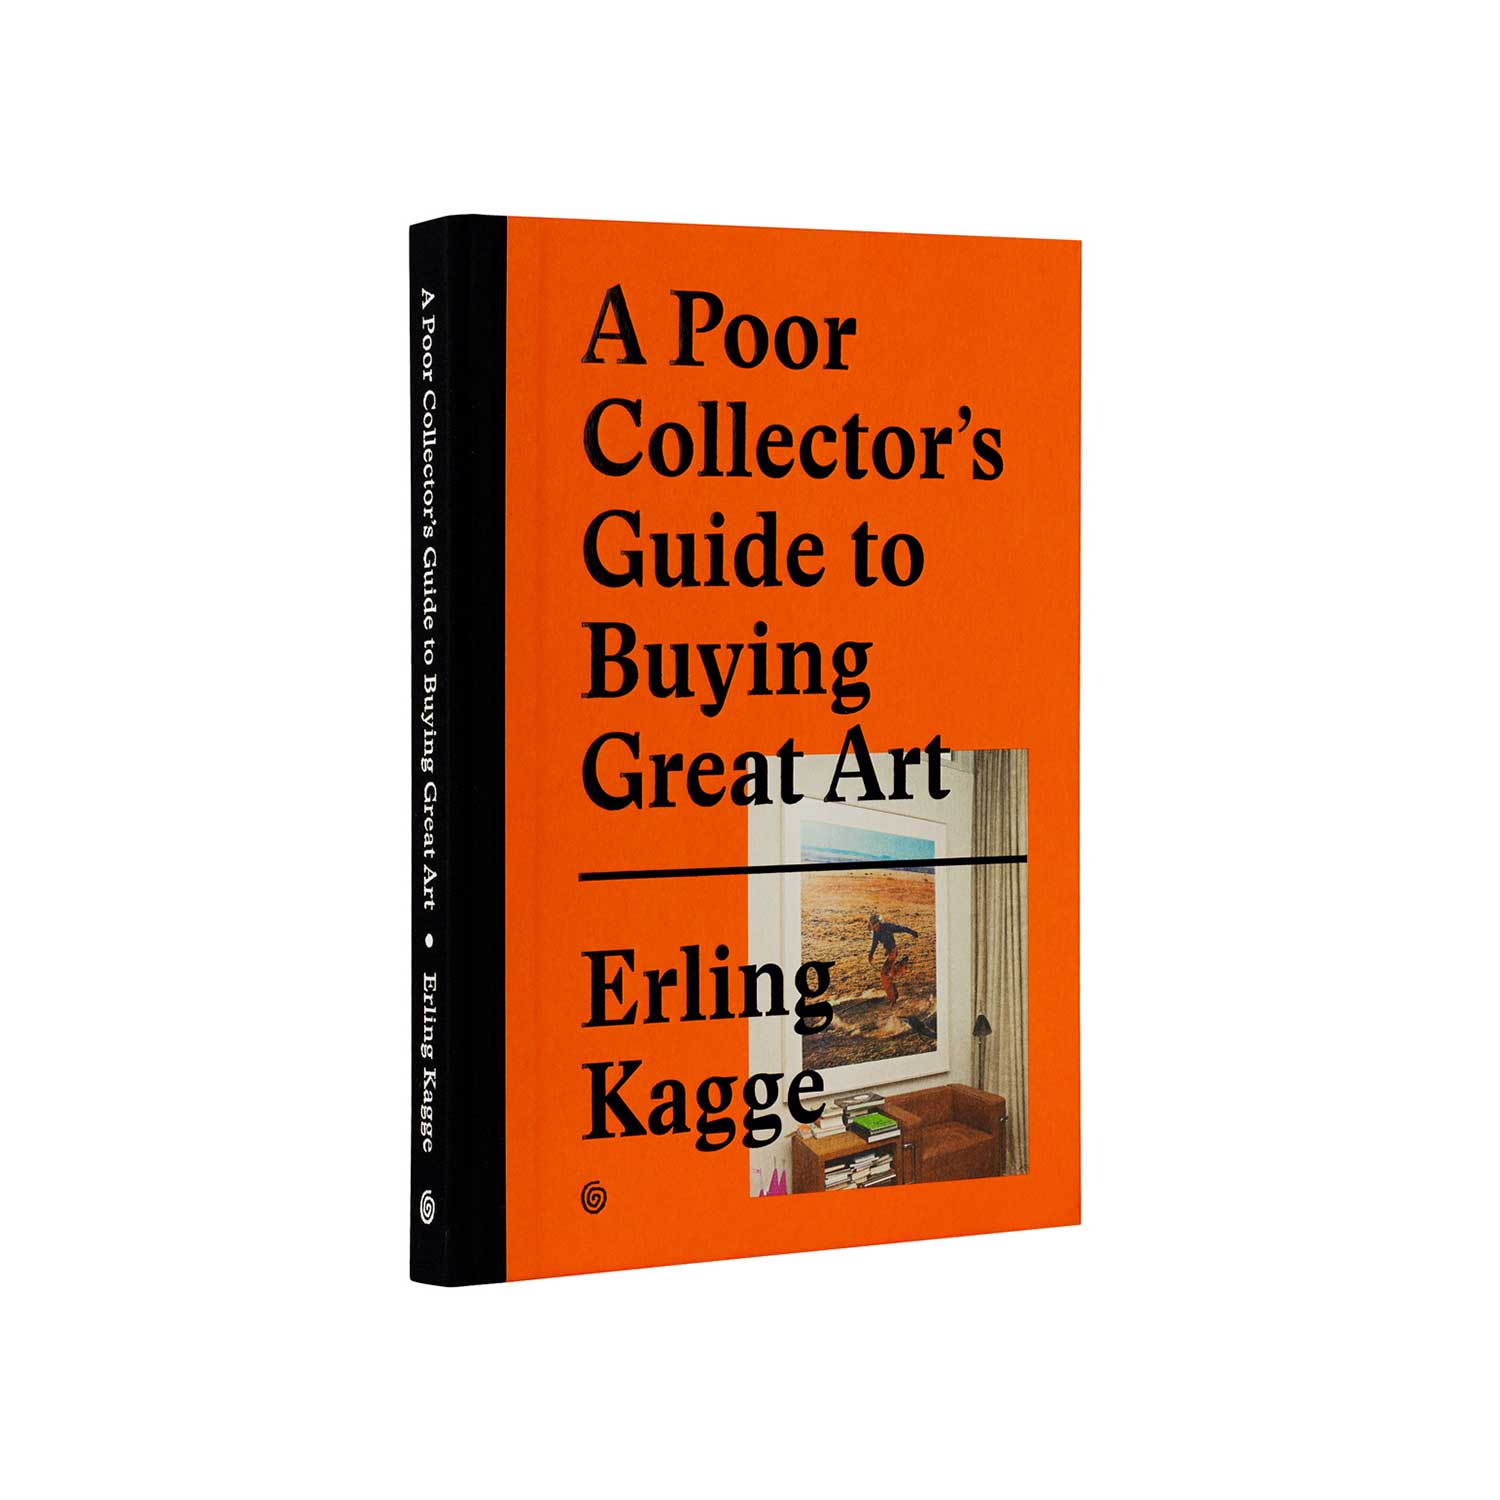 A Poor Collector’s Guide to Buying Great Art Book